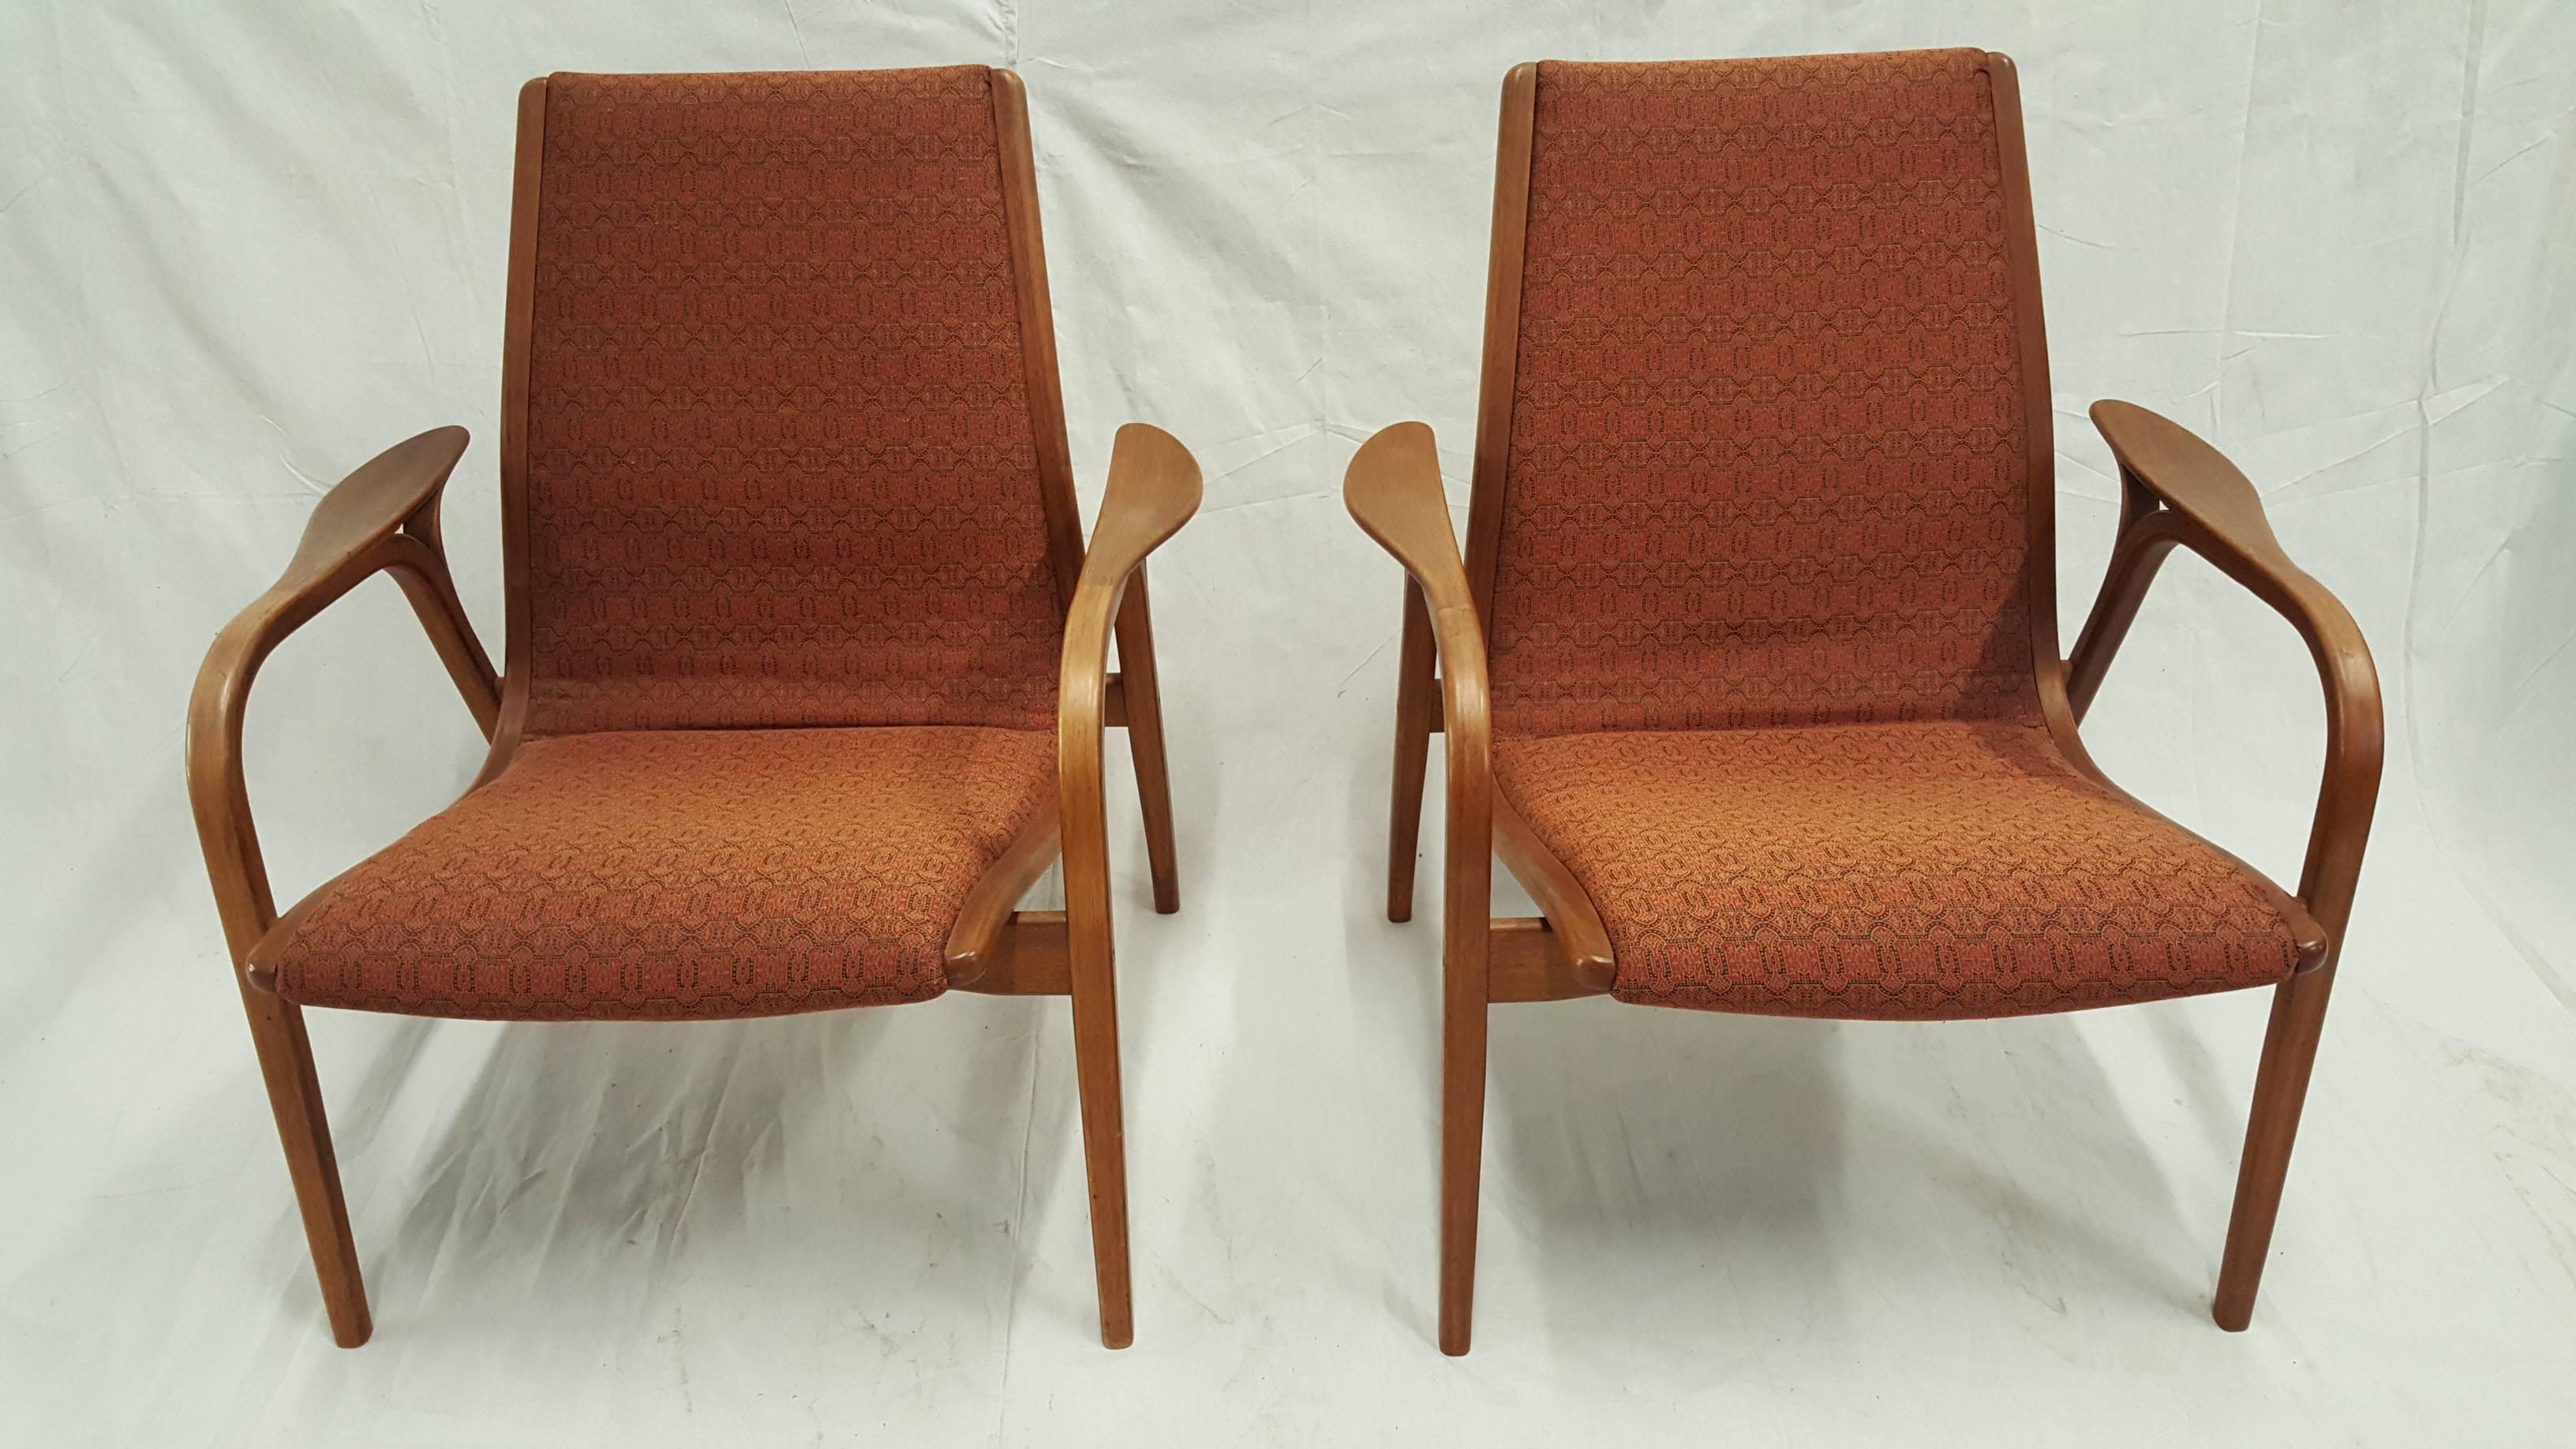 Pair of Swedish wood and fabric lounge chair designed by Yngve Ekstrom in the 1960s.  All original.